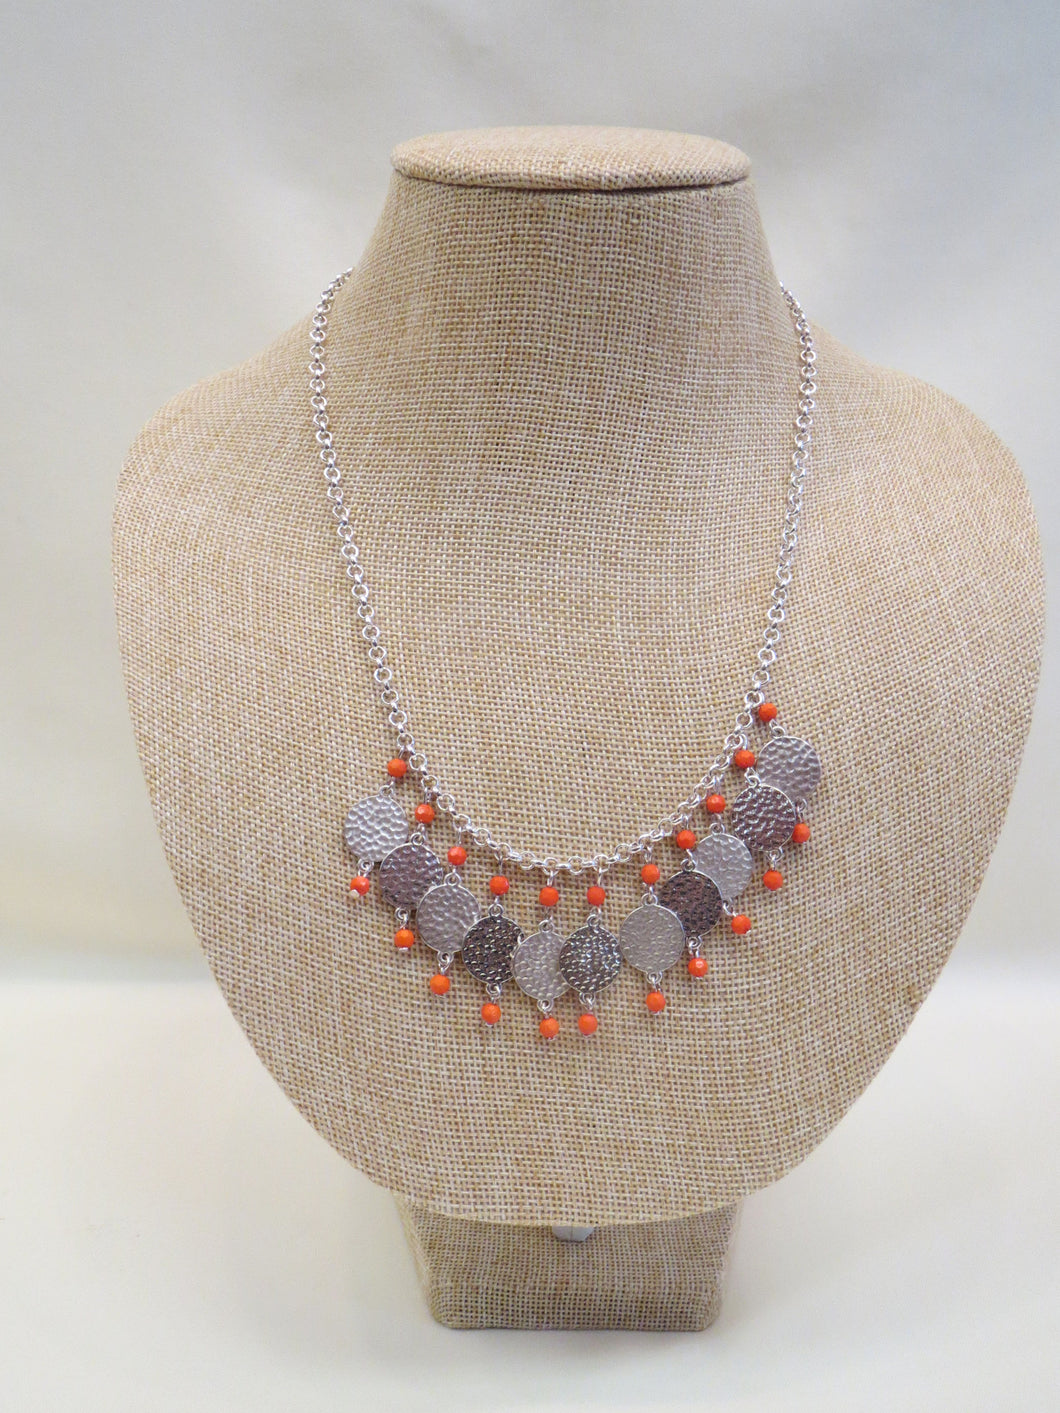 ADO Silver Necklace with Coral Beads | All Dec'd Out